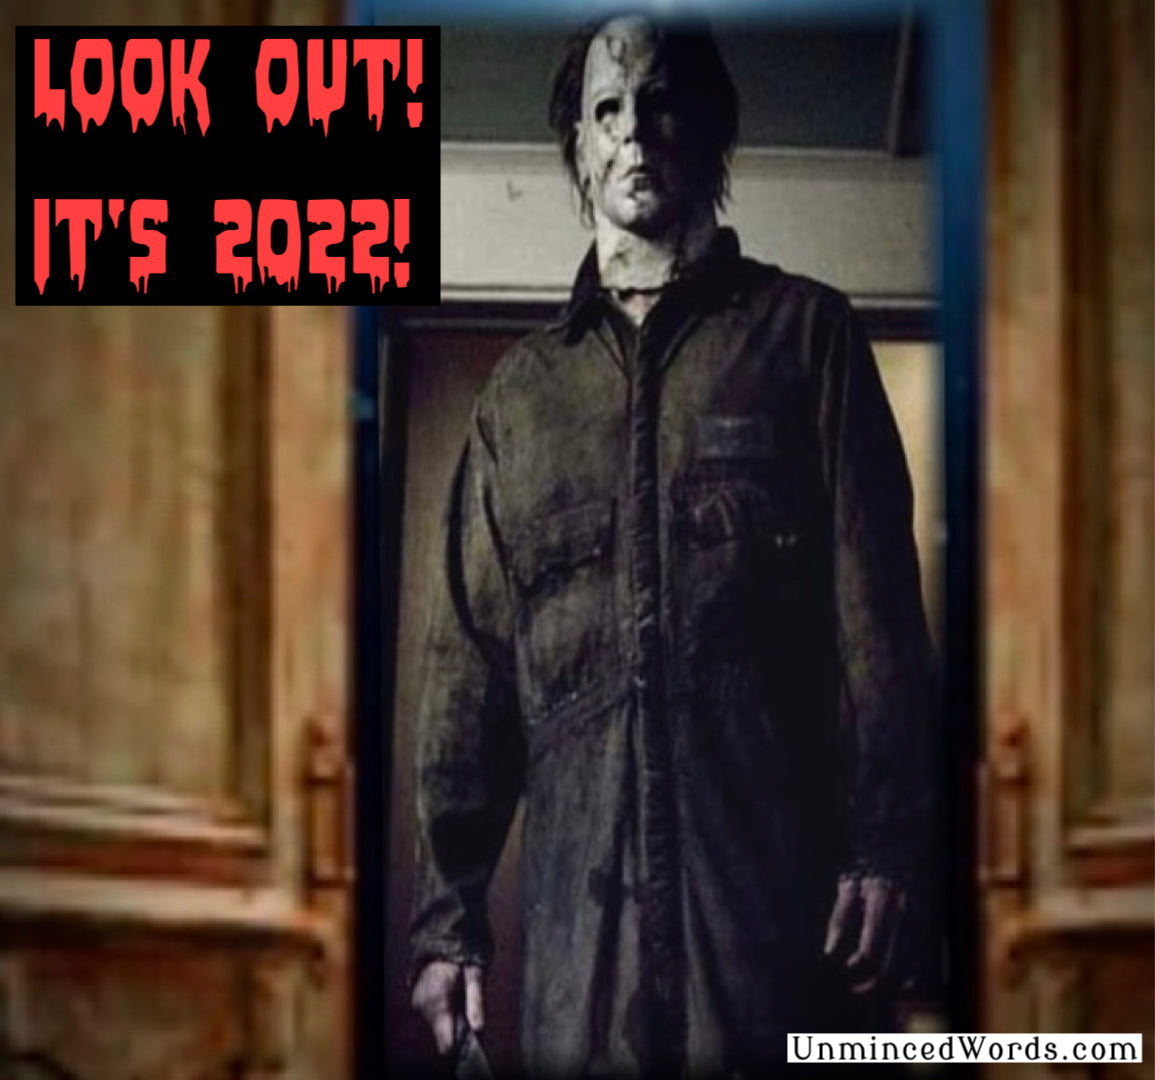 Look out! Here comes 2022!